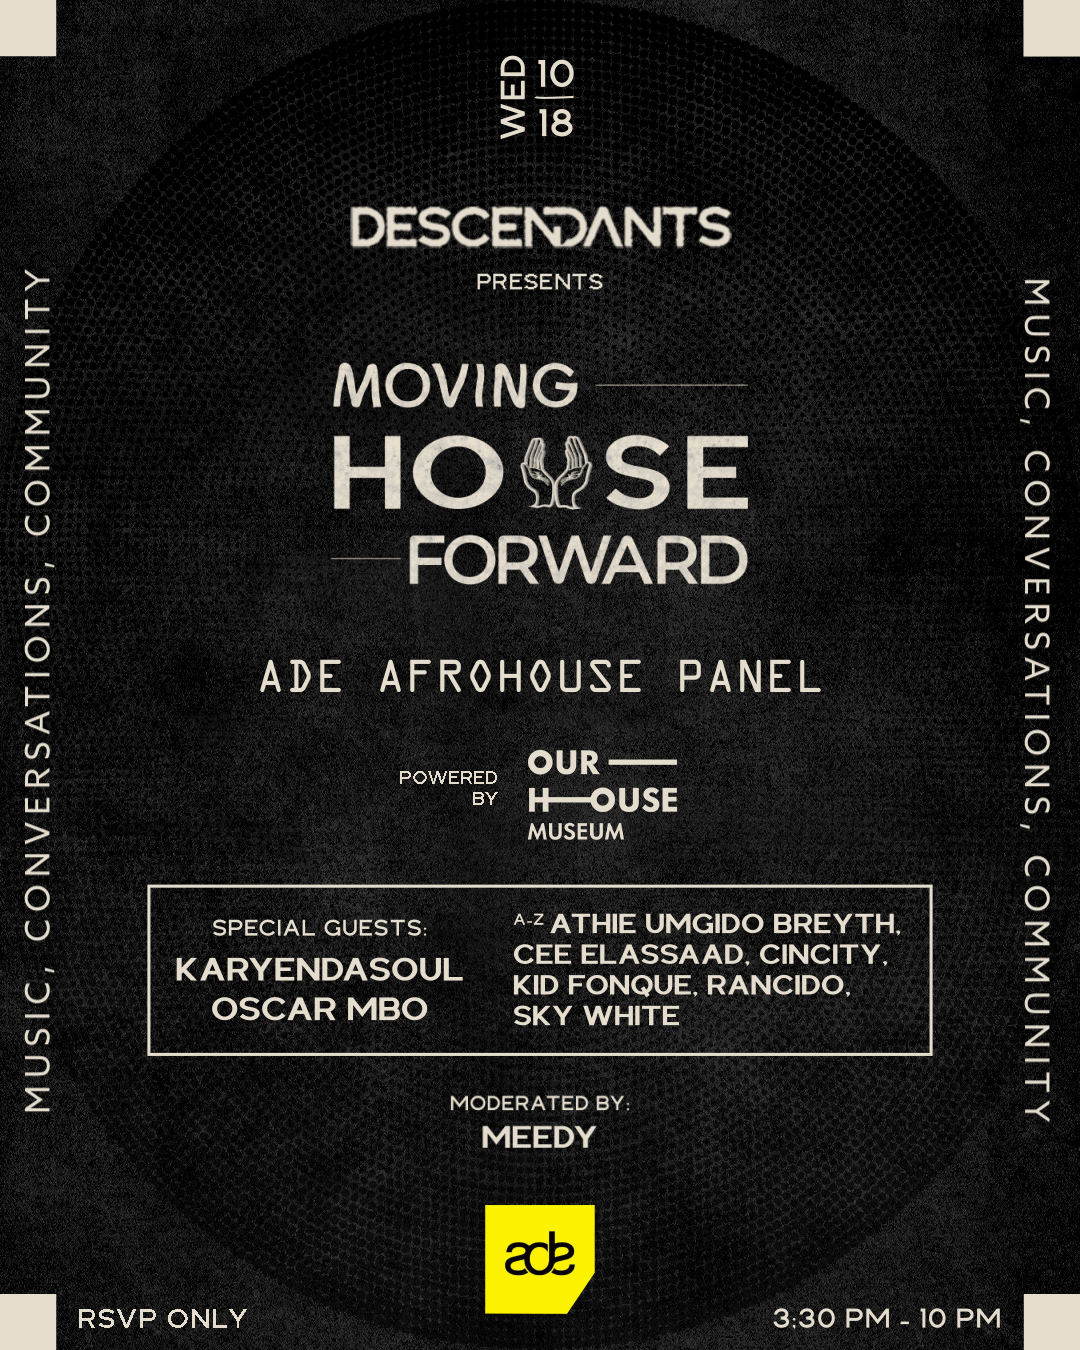 DESCENDANTS presents: Moving House Forward (ADE Afro House Panel) - Página frontal